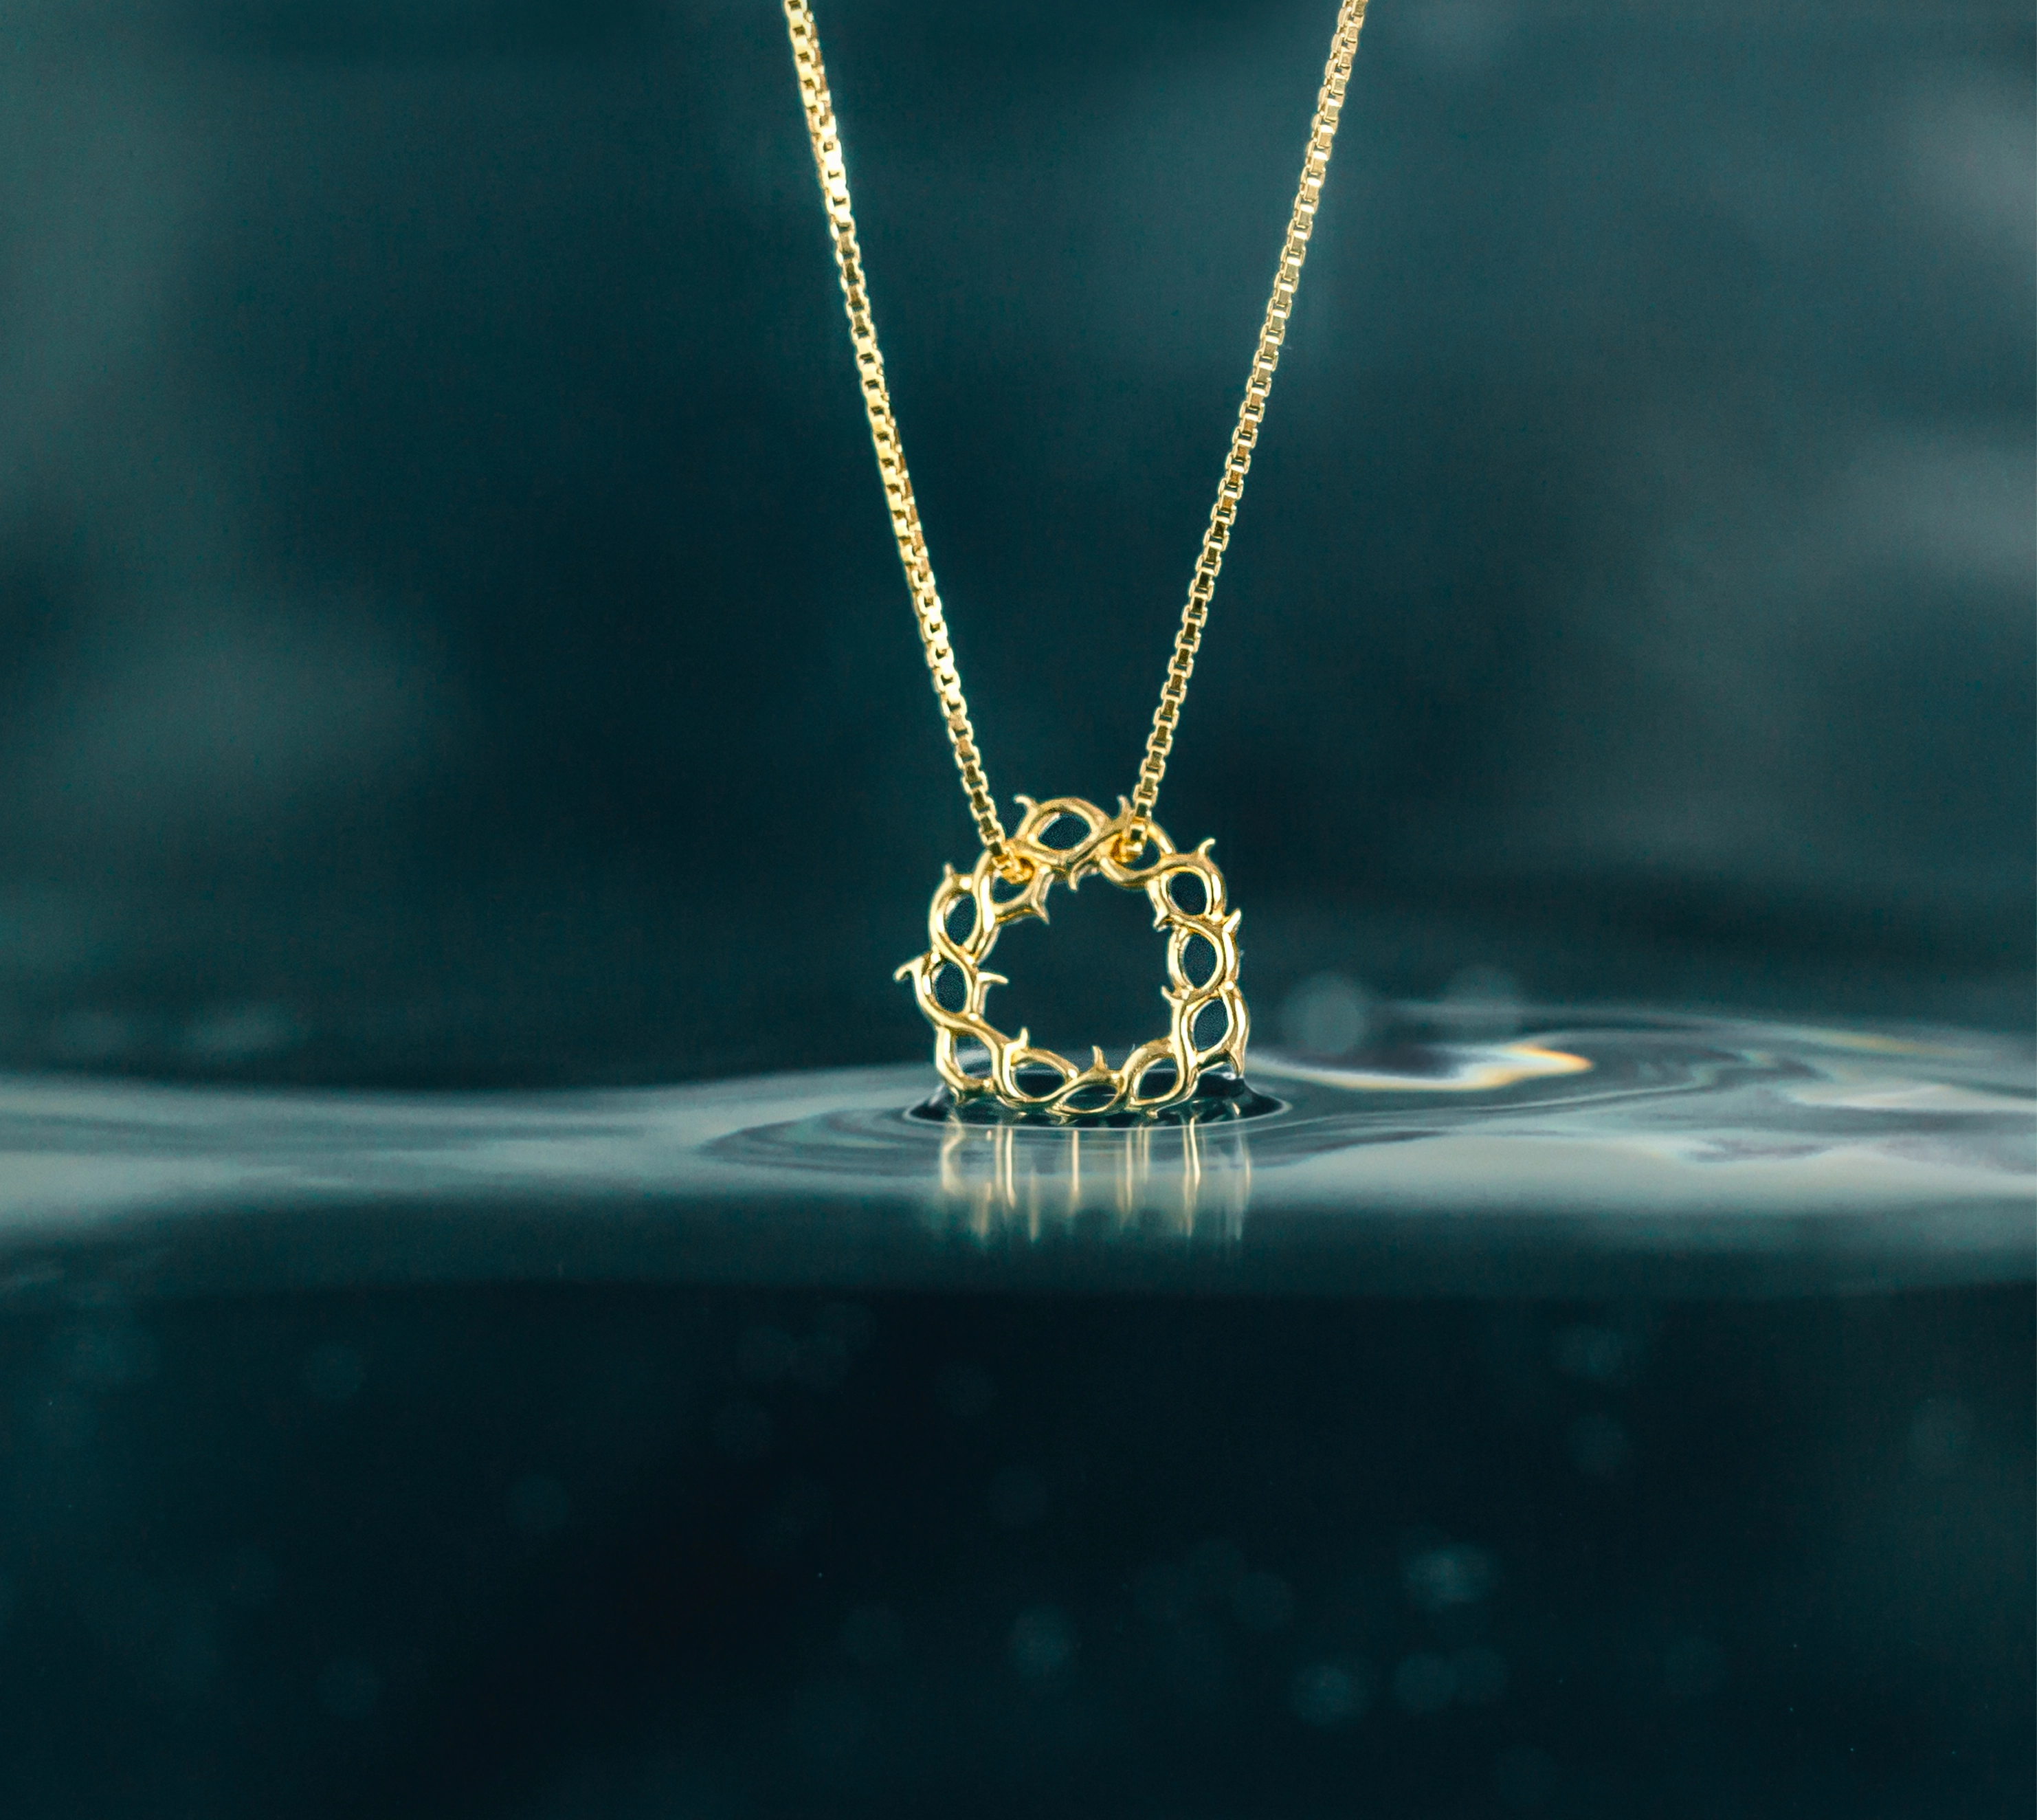 The gold vermeil Crown of Thorns Necklace from the Insignia Collection by Rizen Jewelry dipping in water with depth color background.